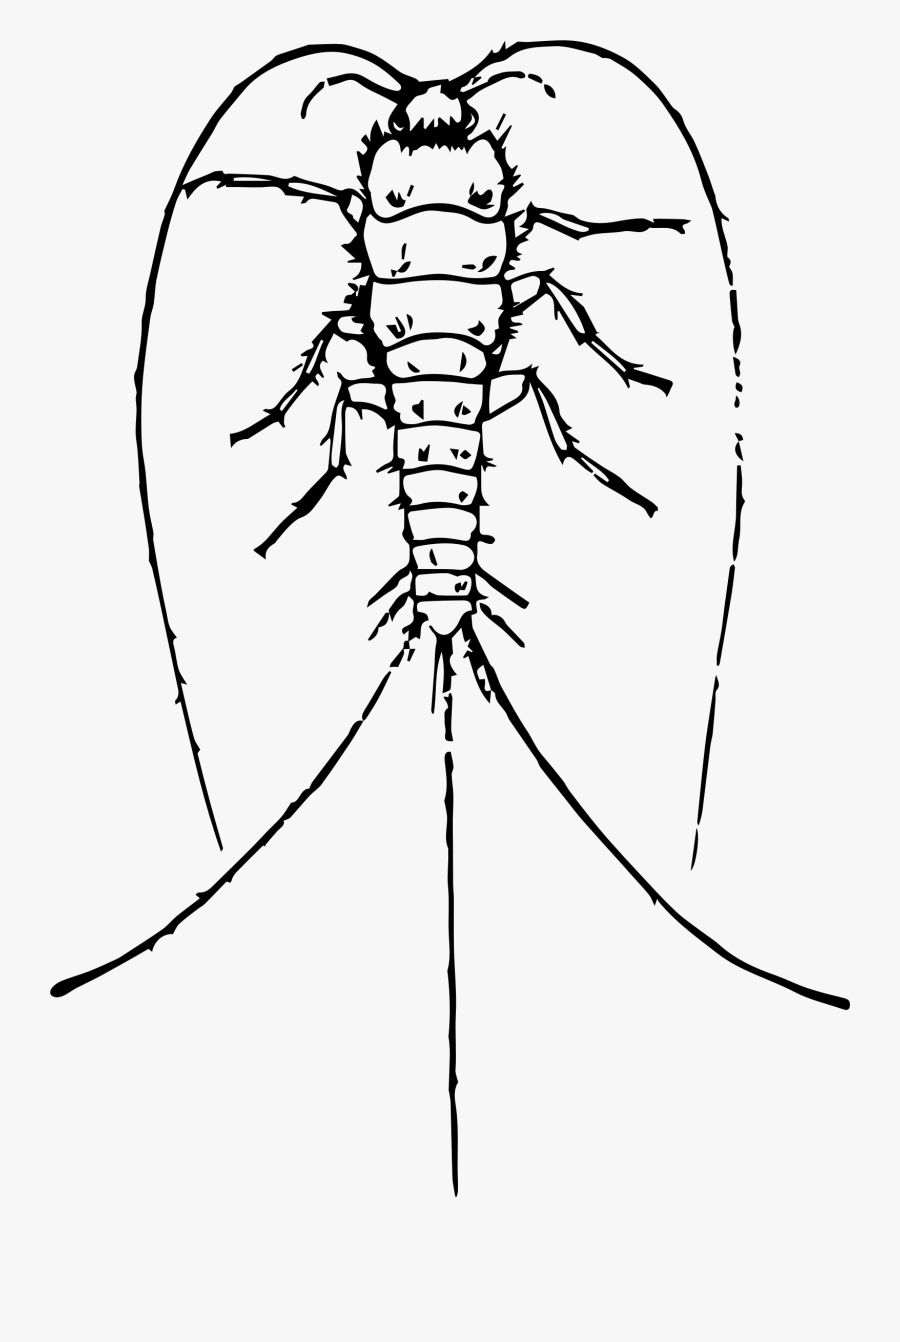 Clipart - Silverfish Image For Drawing, Transparent Clipart